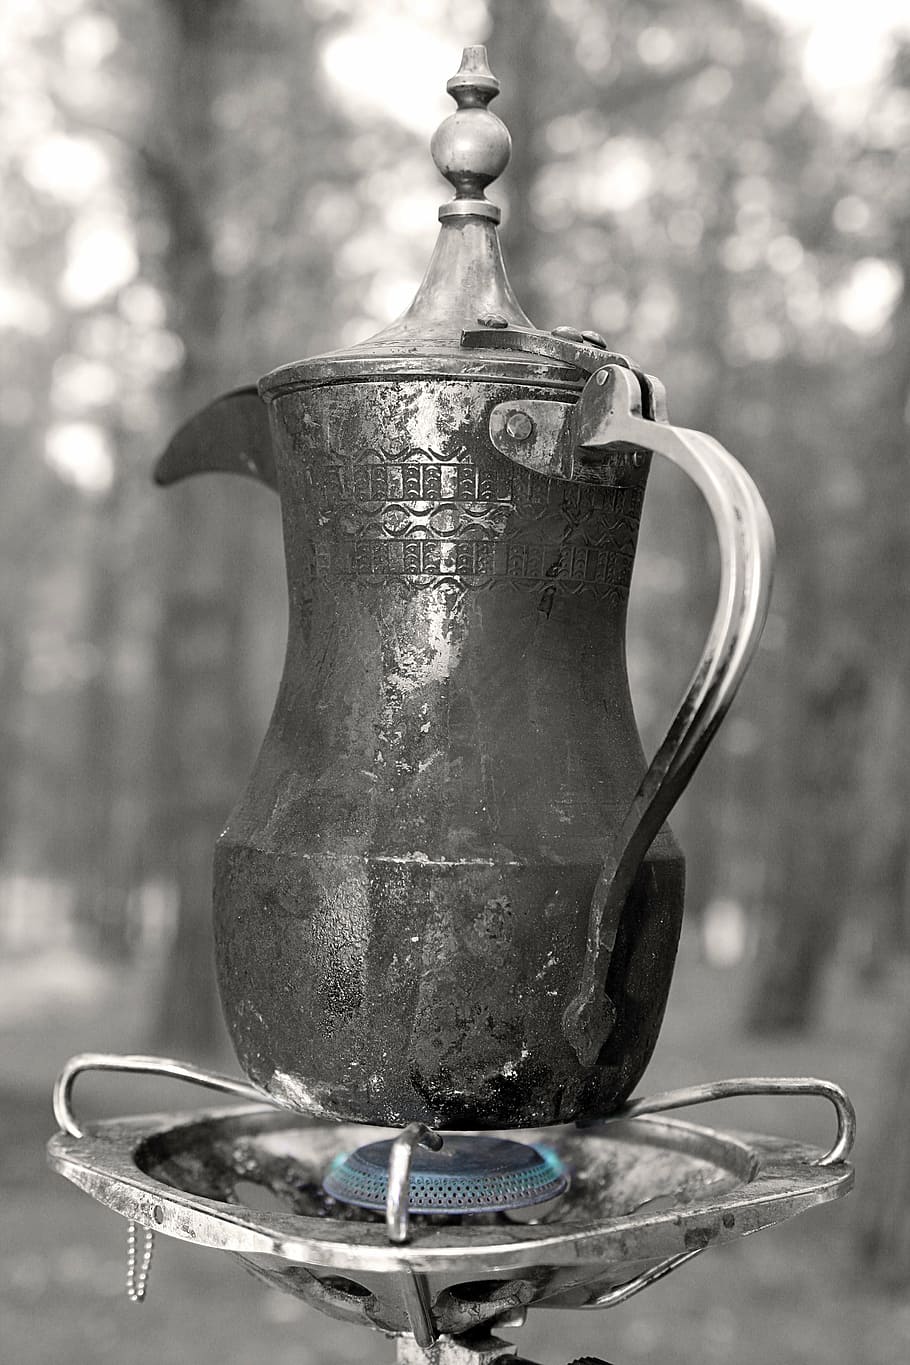 percolator, coffee, natural, focus on foreground, close-up, metal, still life, handle, drink, food and drink